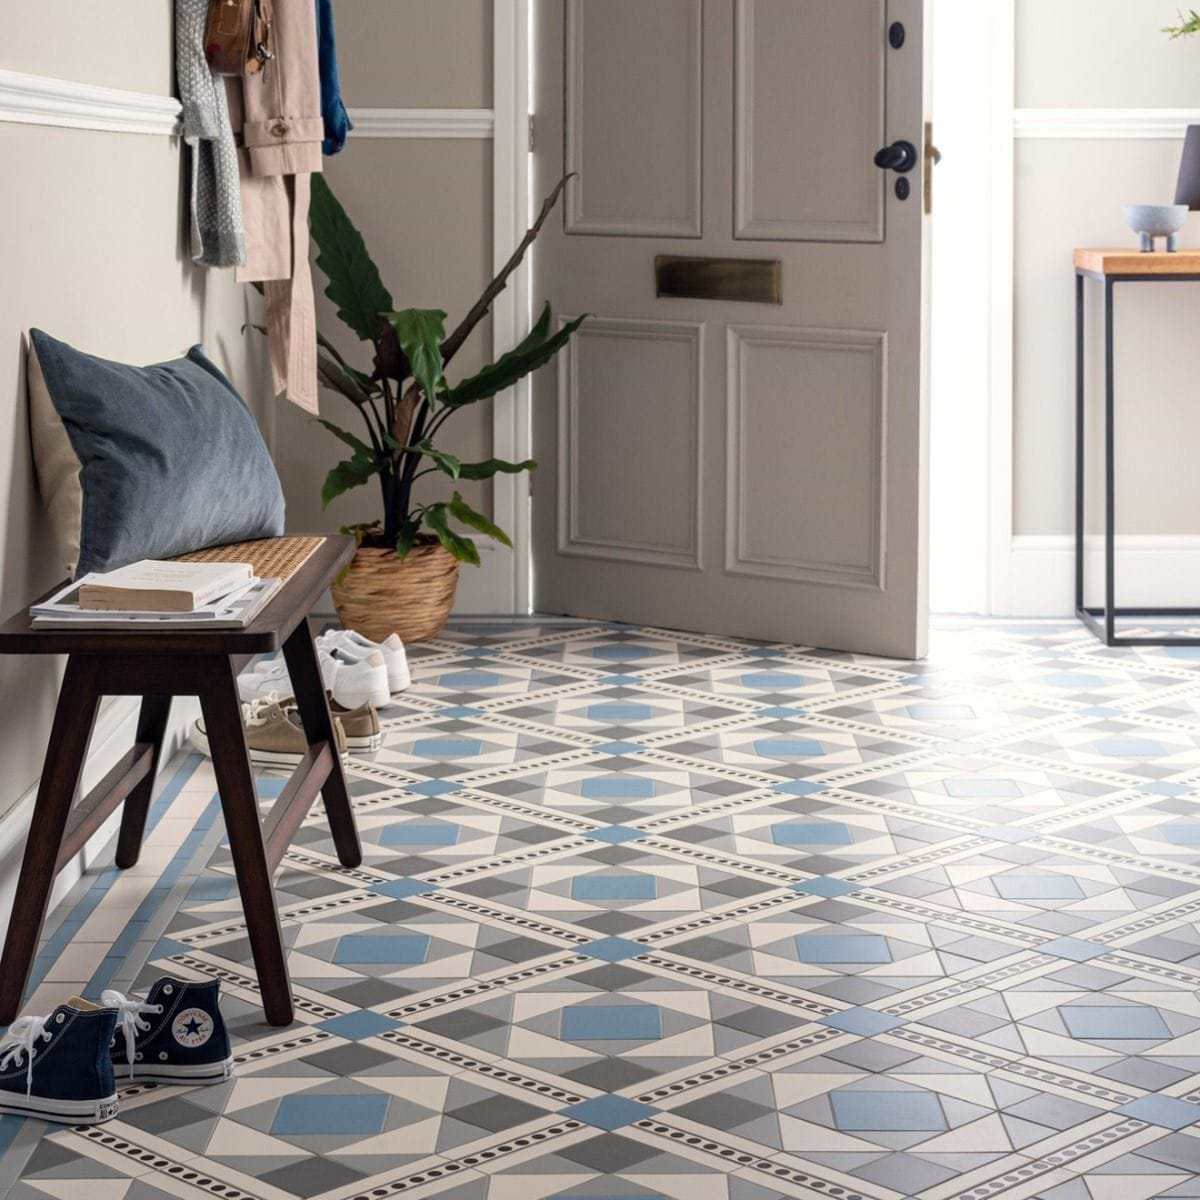 Original Style Tiles - Victorian Lindisfarne with Melbourne